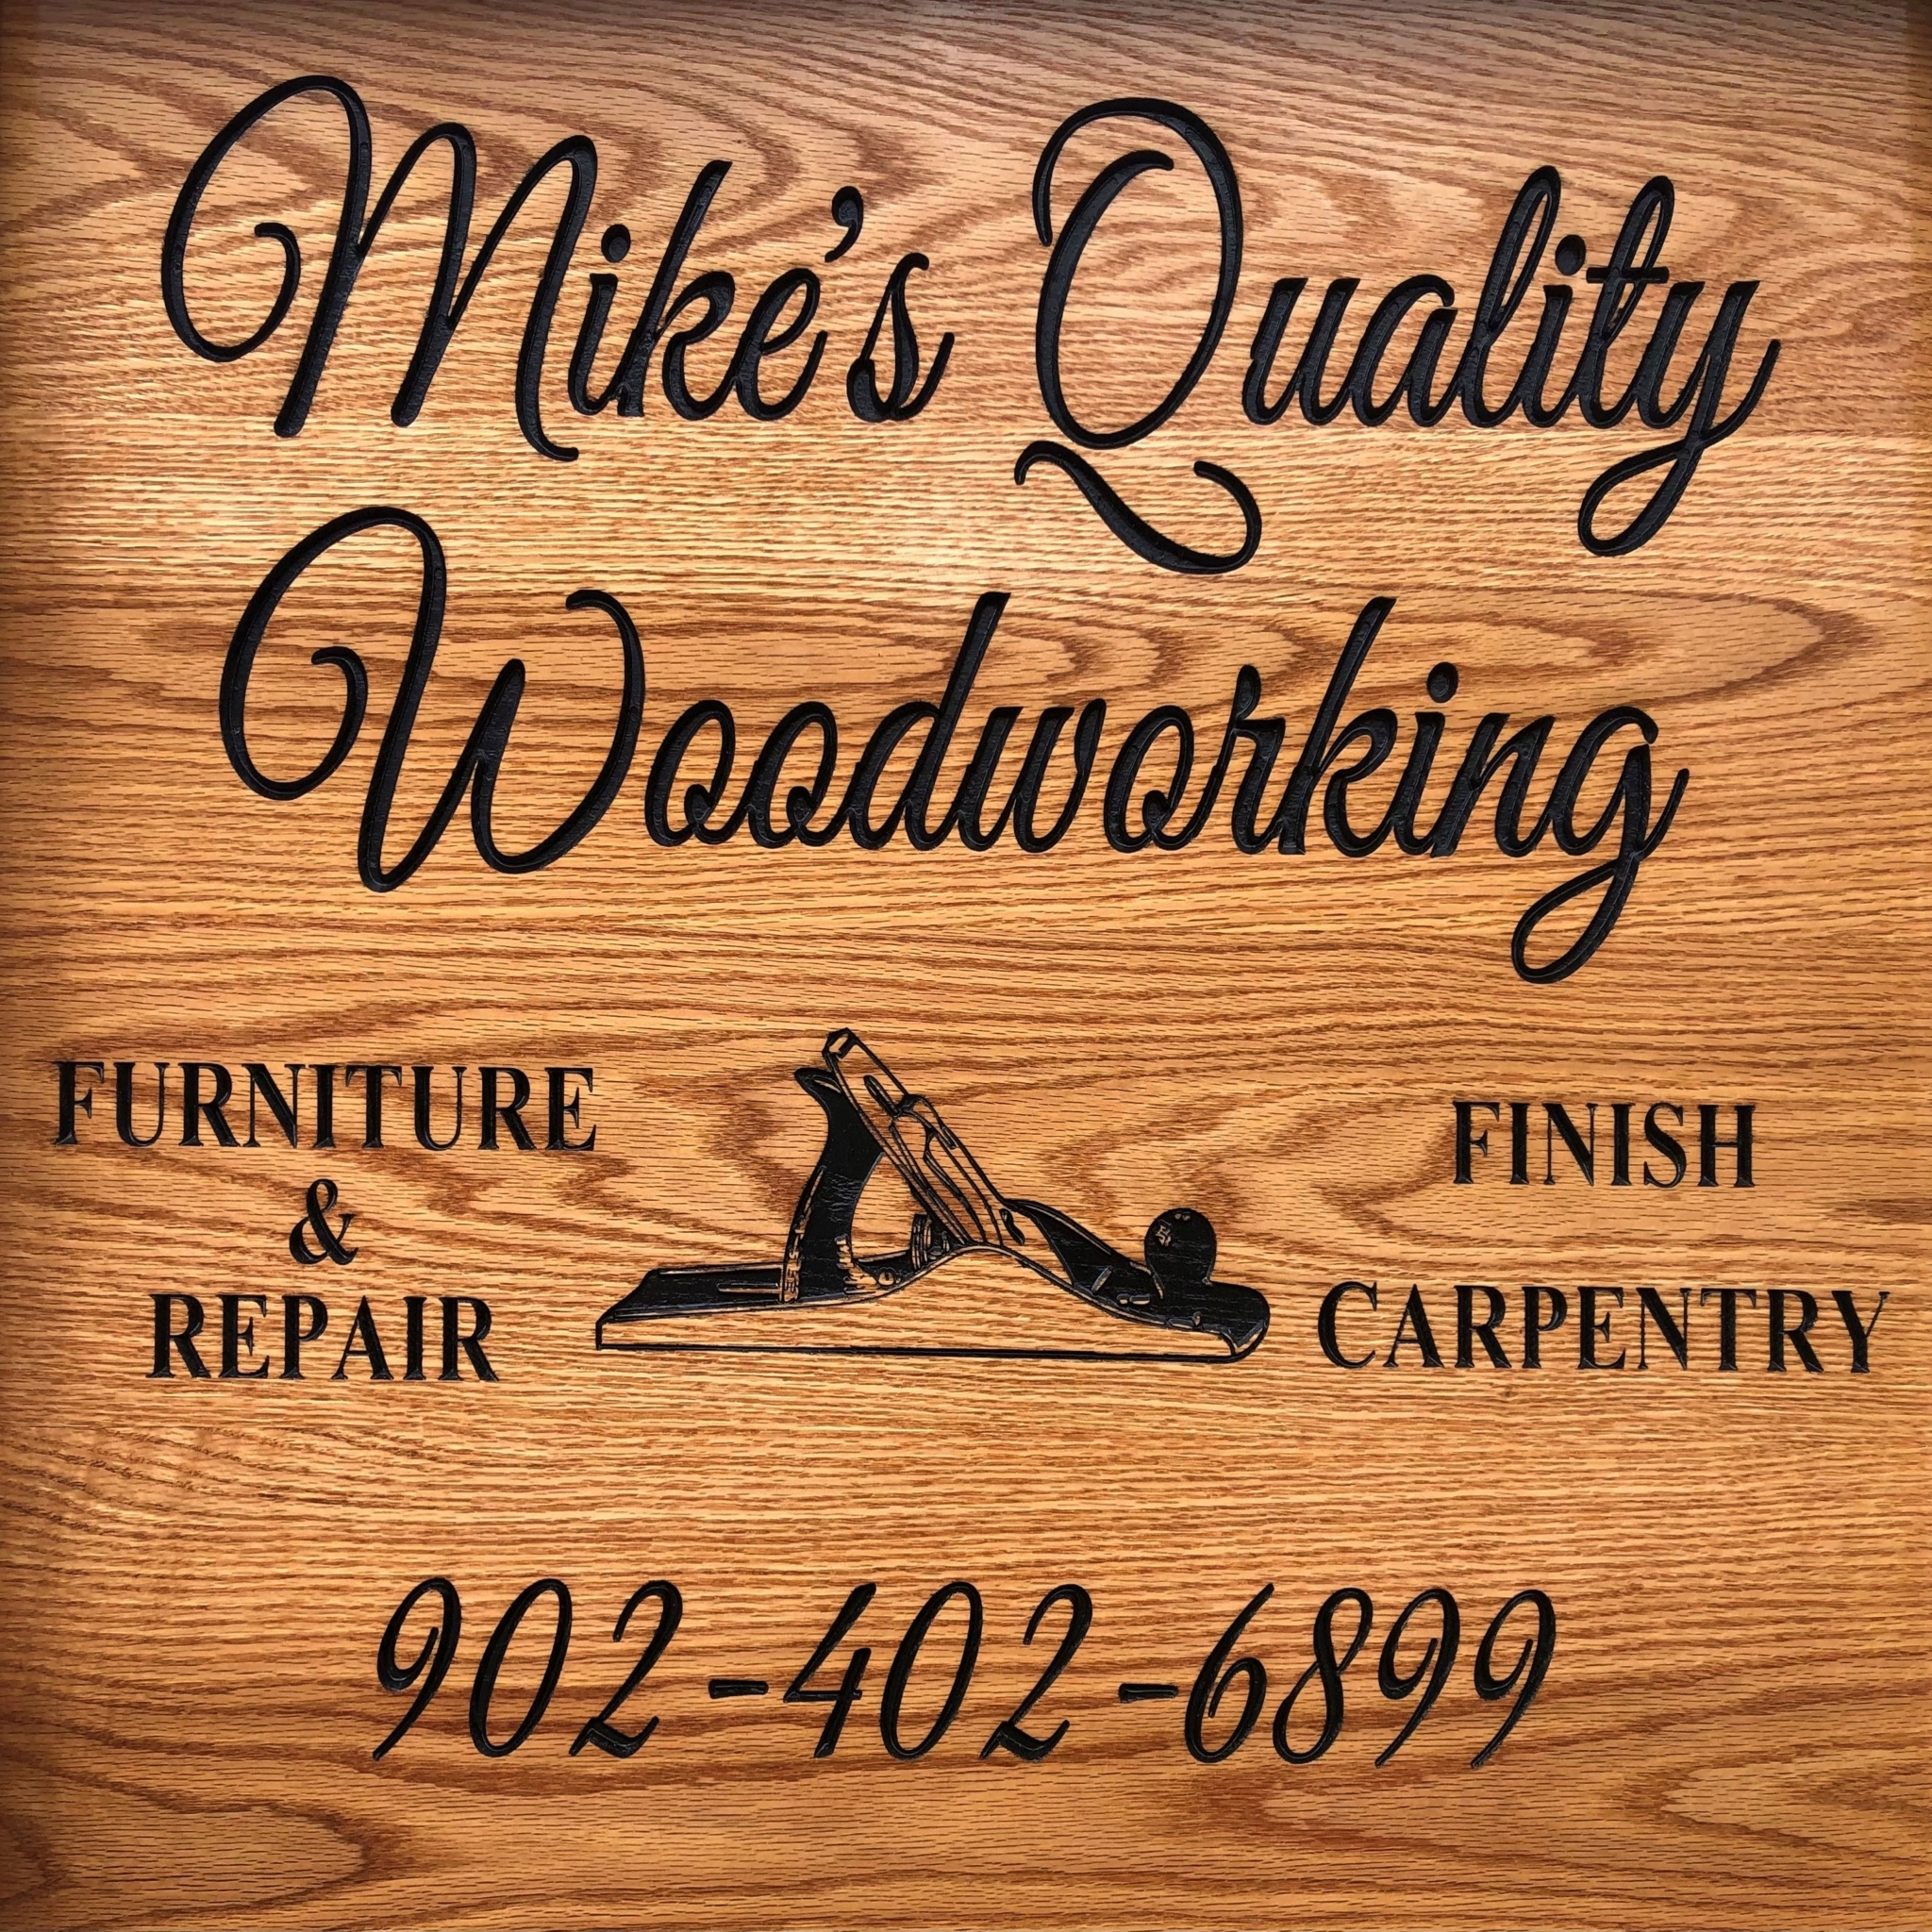 Mike's Quality Woodworking - Carpentry & Carpenters